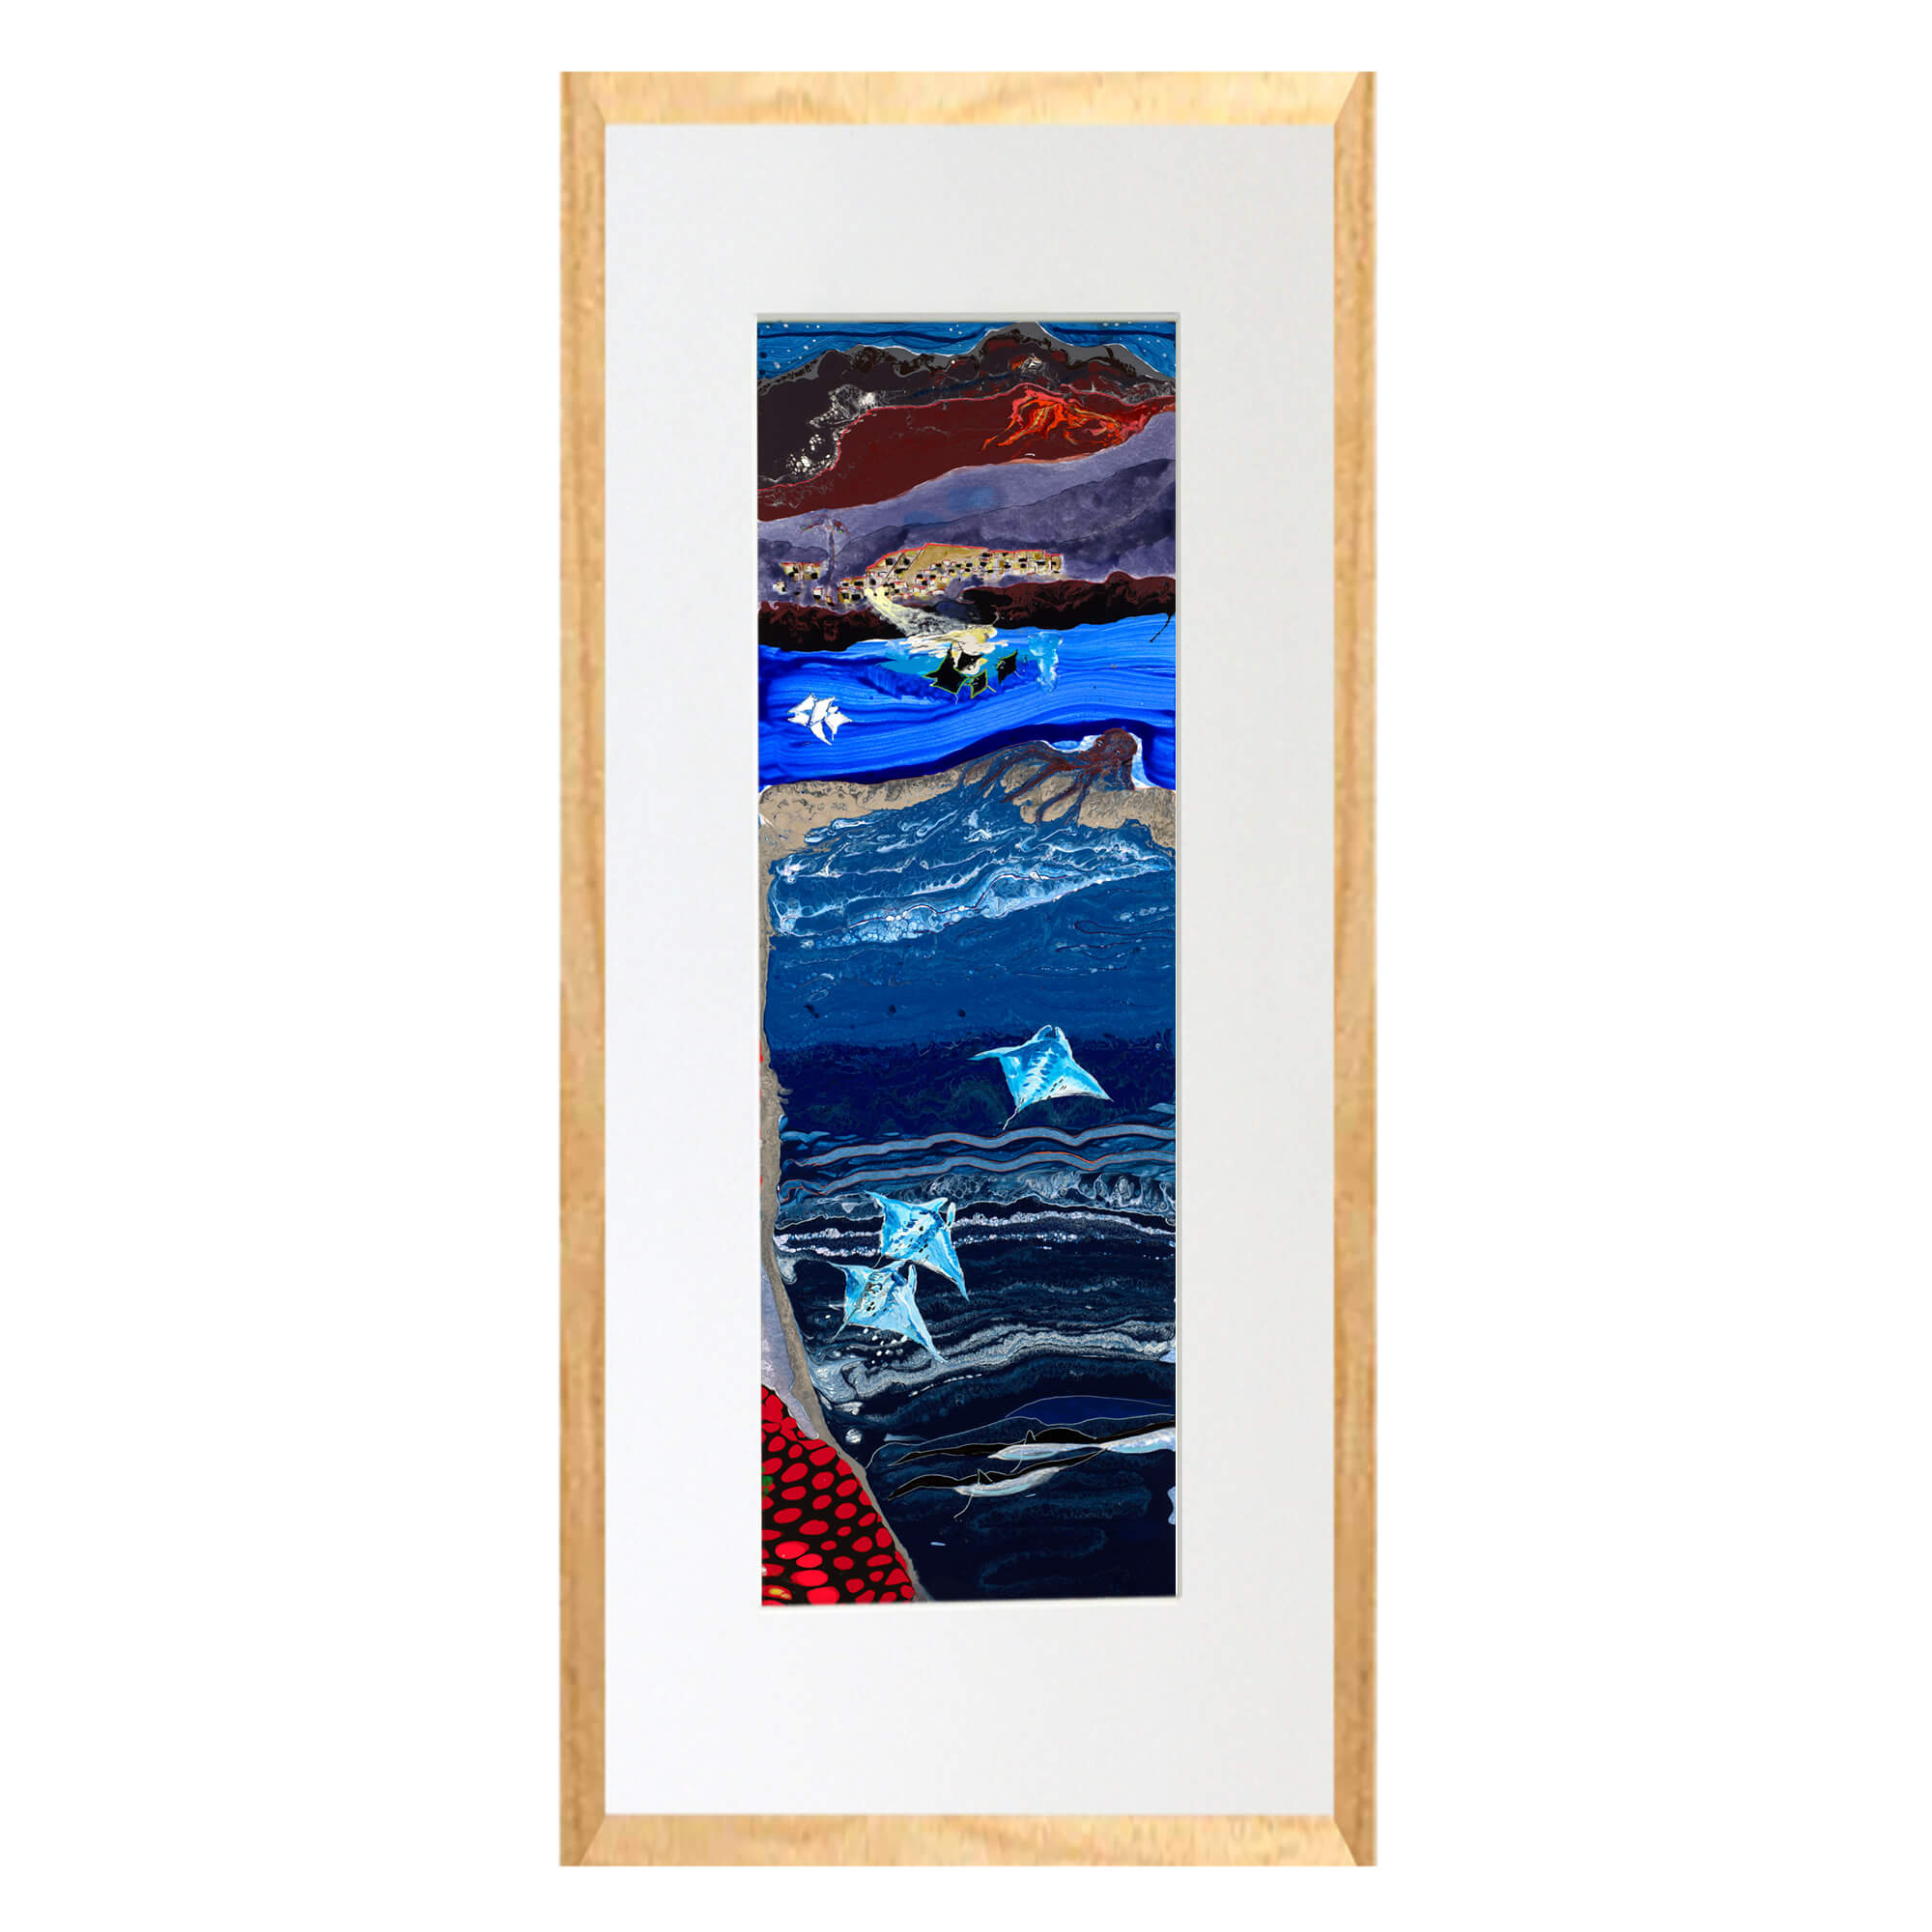 art print featuring abstract layers of the ocean with sea creatures by Hawaii artist Robert Hazzard